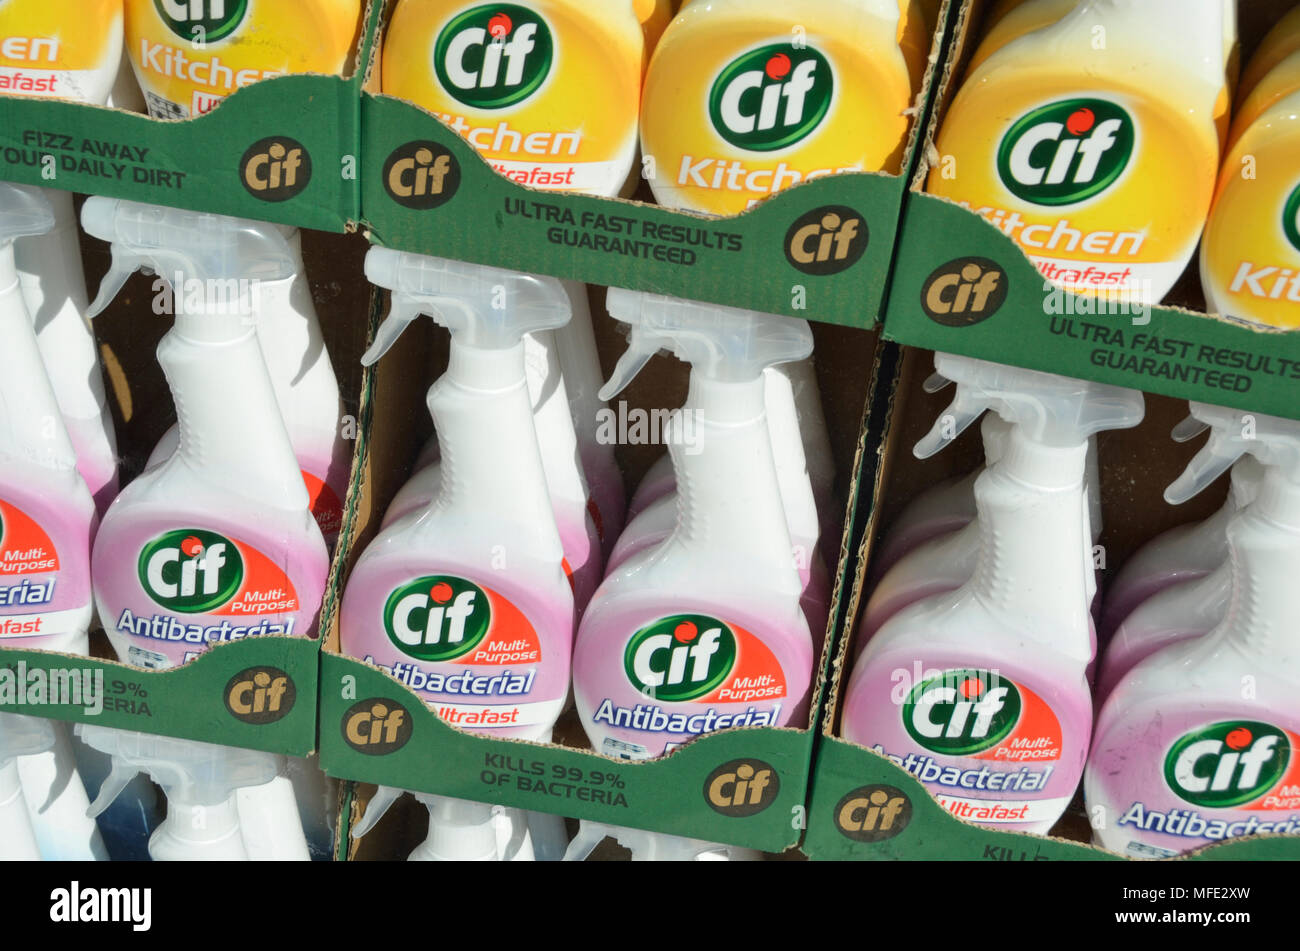 Cif cleaning agent spray bottles in a shop window Stock Photo